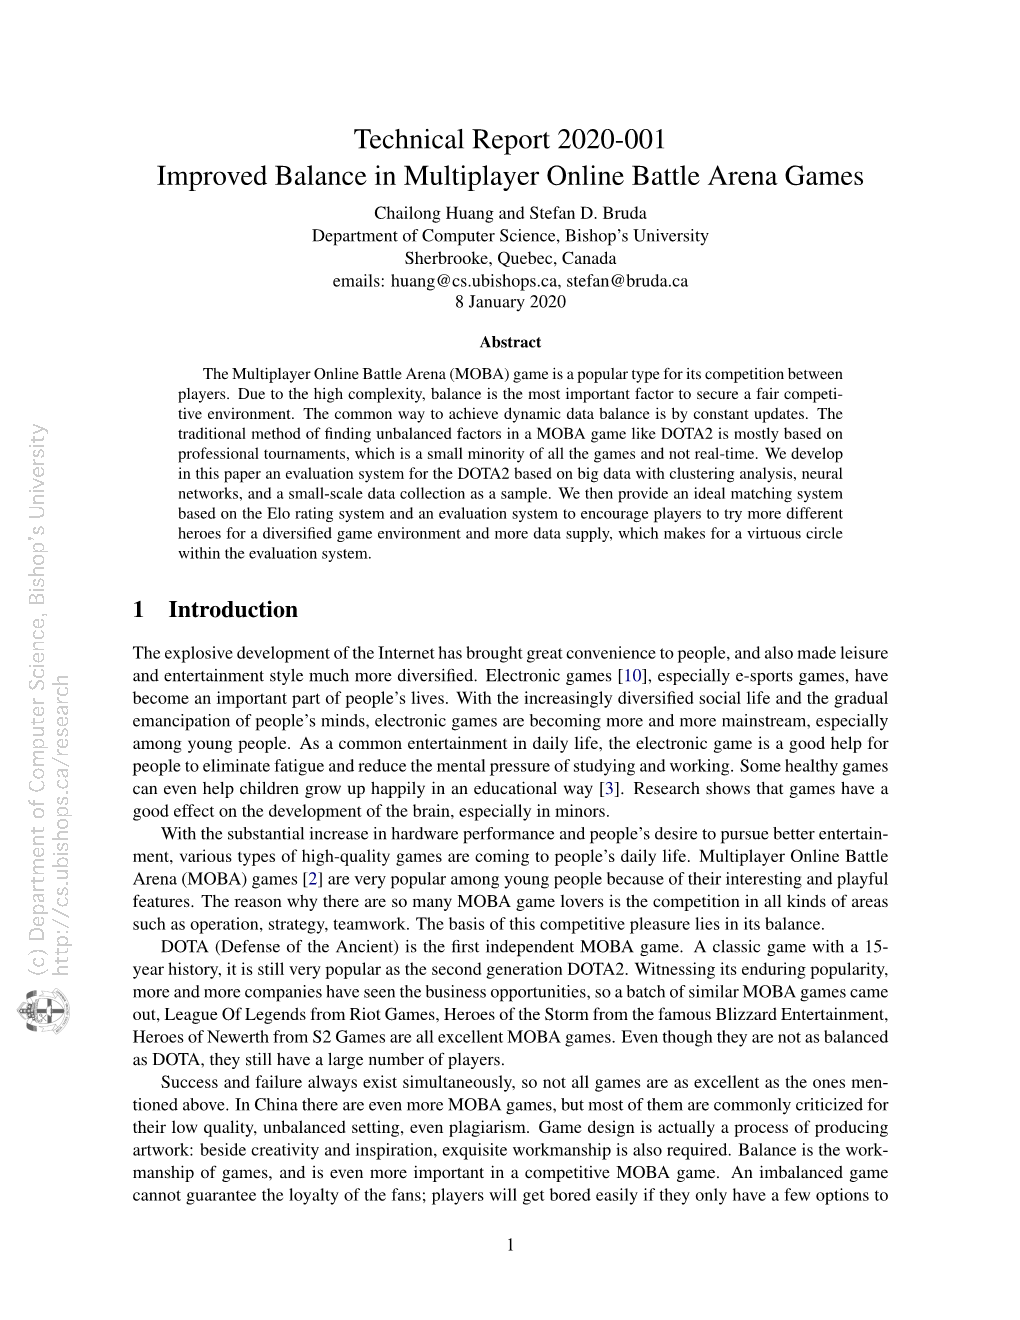 Technical Report 2020-001 Improved Balance in Multiplayer Online Battle